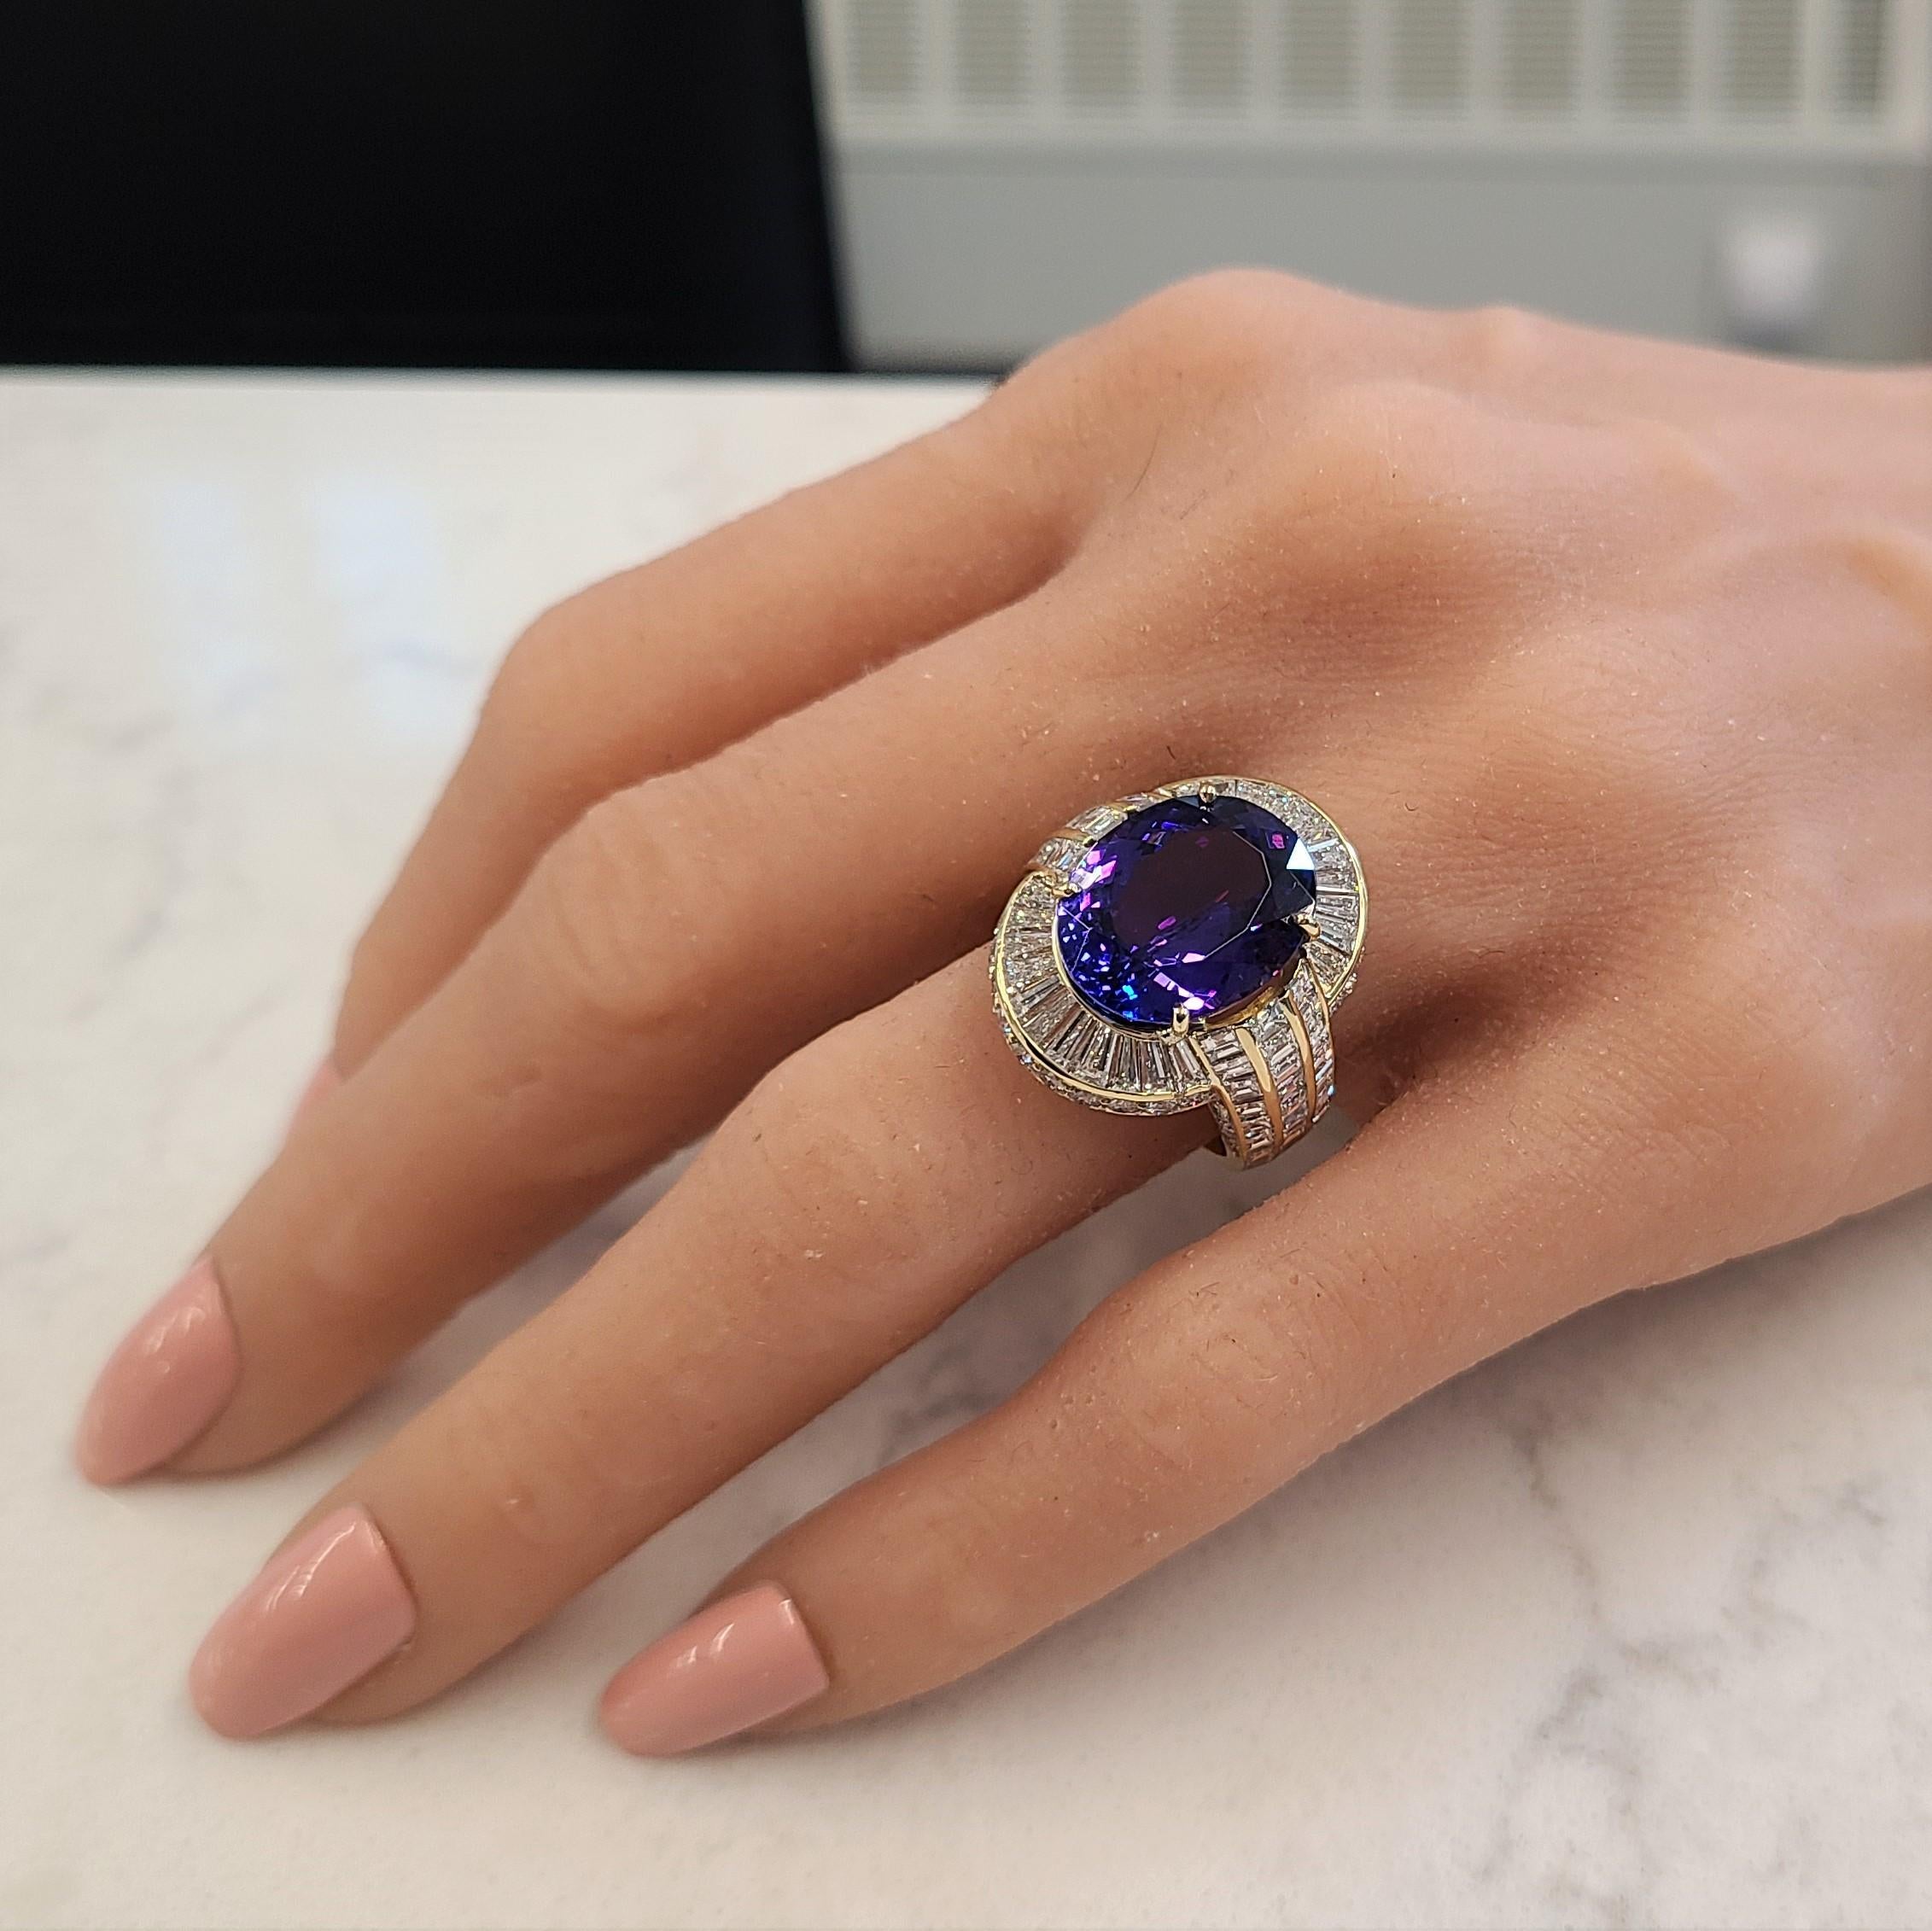 Oval Cut 8.73 Carat Oval Tanzanite & Diamond Cocktail Ring in 18k Yellow Gold